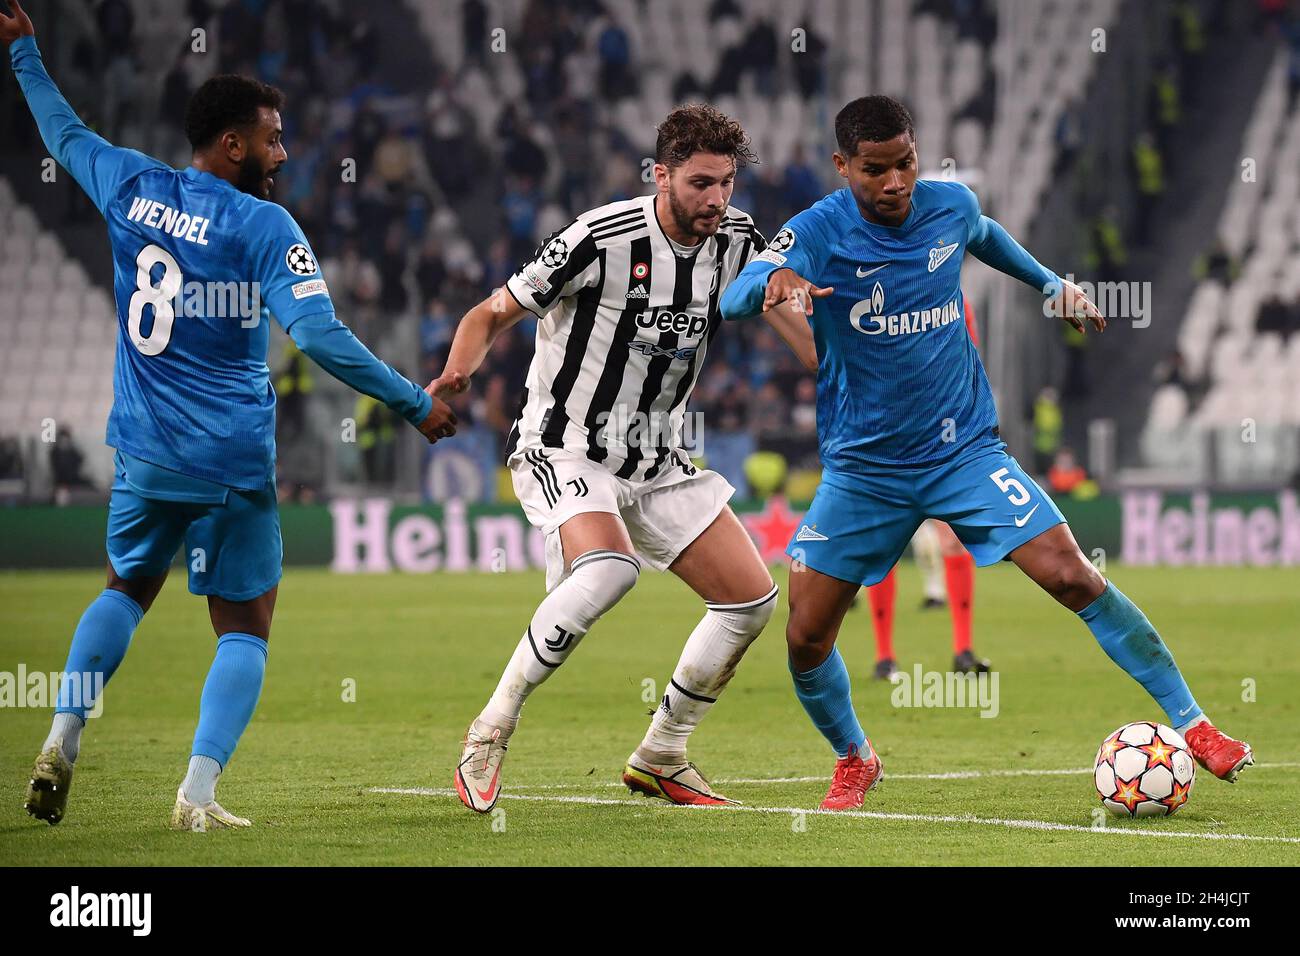 Torino, Italy. 02nd Nov, 2021. Wendel of Zenit, Manuel Locatelli of Juventus FC and Wílmar Barrios of Zenit compete for the ball during the Uefa Champions League group H football match between Juventus FC and Zenit ST Petersburg at Juventus stadium in Torino (Italy), November 2nd, 2021. Photo Federico Tardito/Insidefoto Credit: insidefoto srl/Alamy Live News Stock Photo